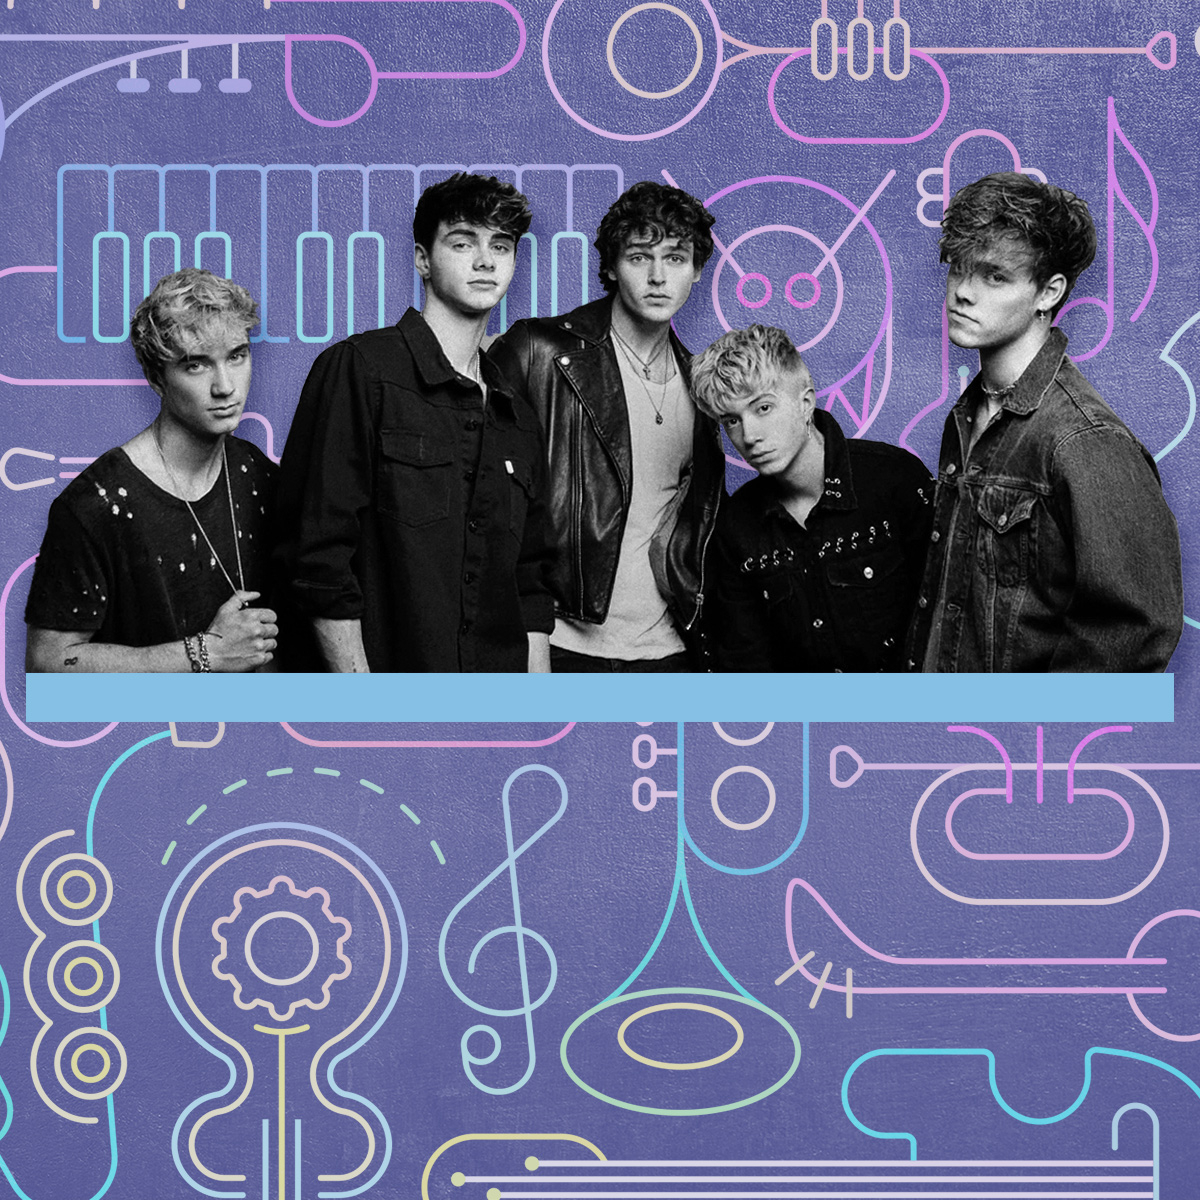 A Guide to Why Don't We: Members, Music, Albums, Rise to Fame